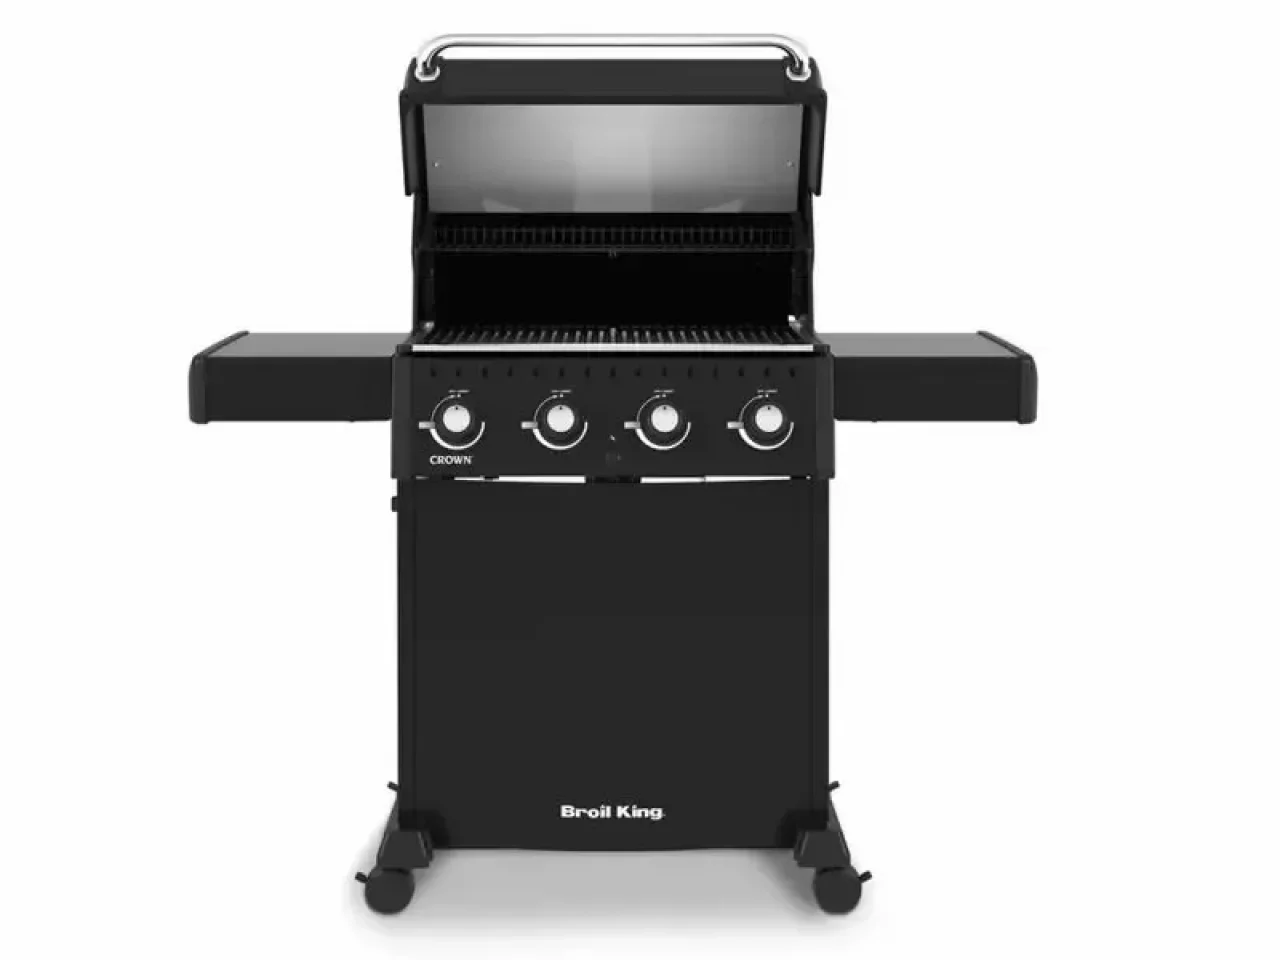 Barbecue Broil King mod. Crown 410